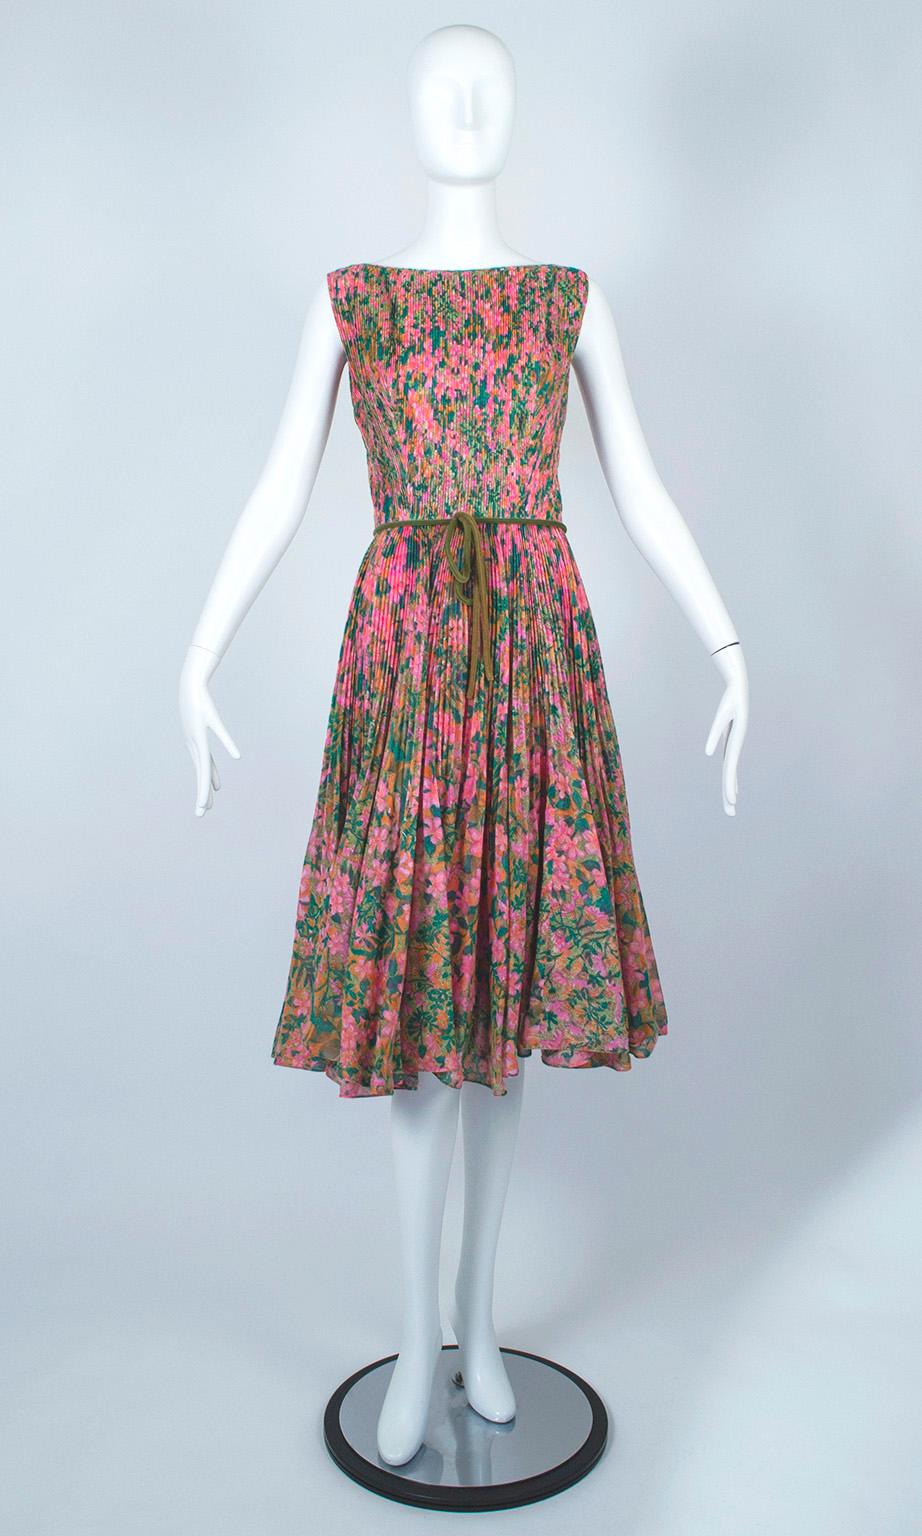 Feminine touches abound on this cheerful boat neck sundress, which features individually-sewn micropleats and a 35-foot skirt with a horsehair-backed hem for maximum fullness and “swish.” A shocking Schiaparelli pink silk lining—invisible to